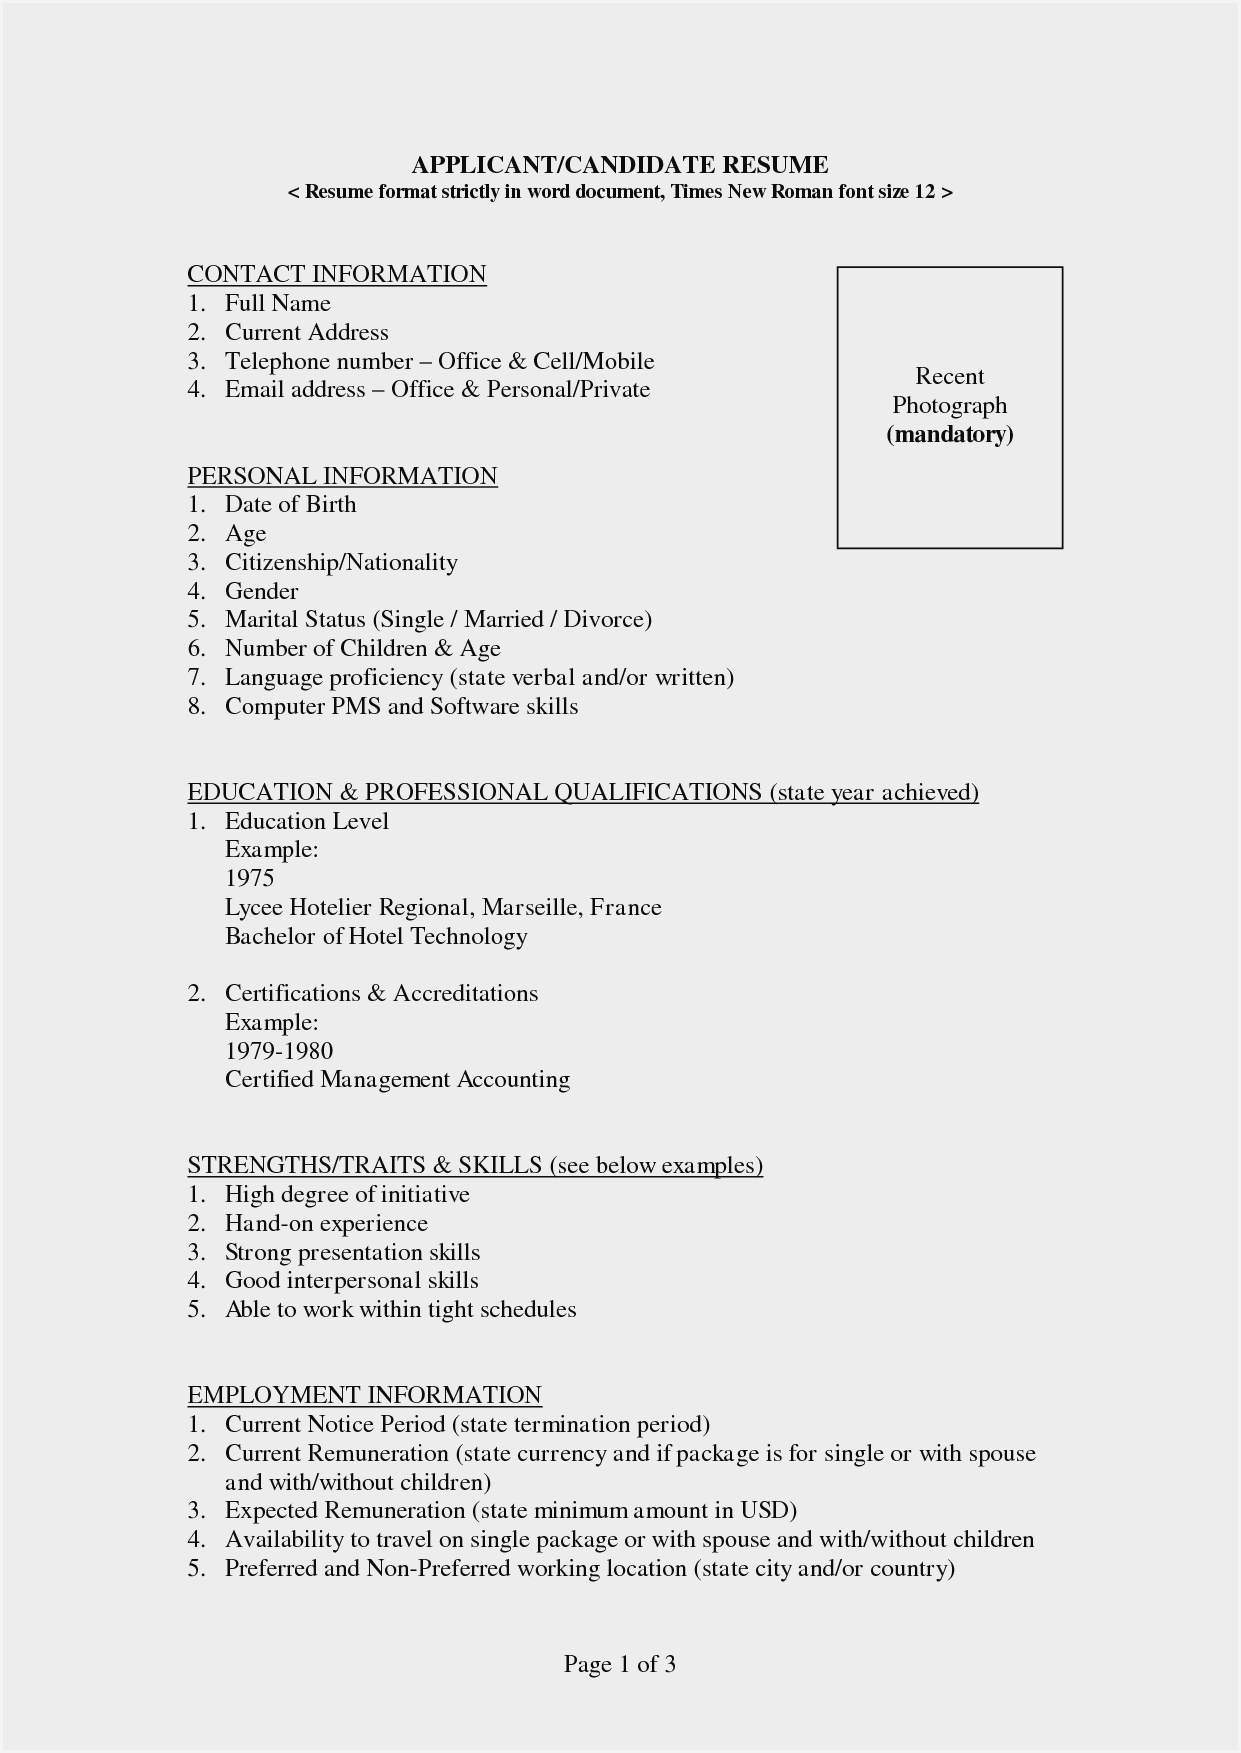 Resume Format Template For Word Download - Resume Sample With Simple Resume Template Microsoft Word